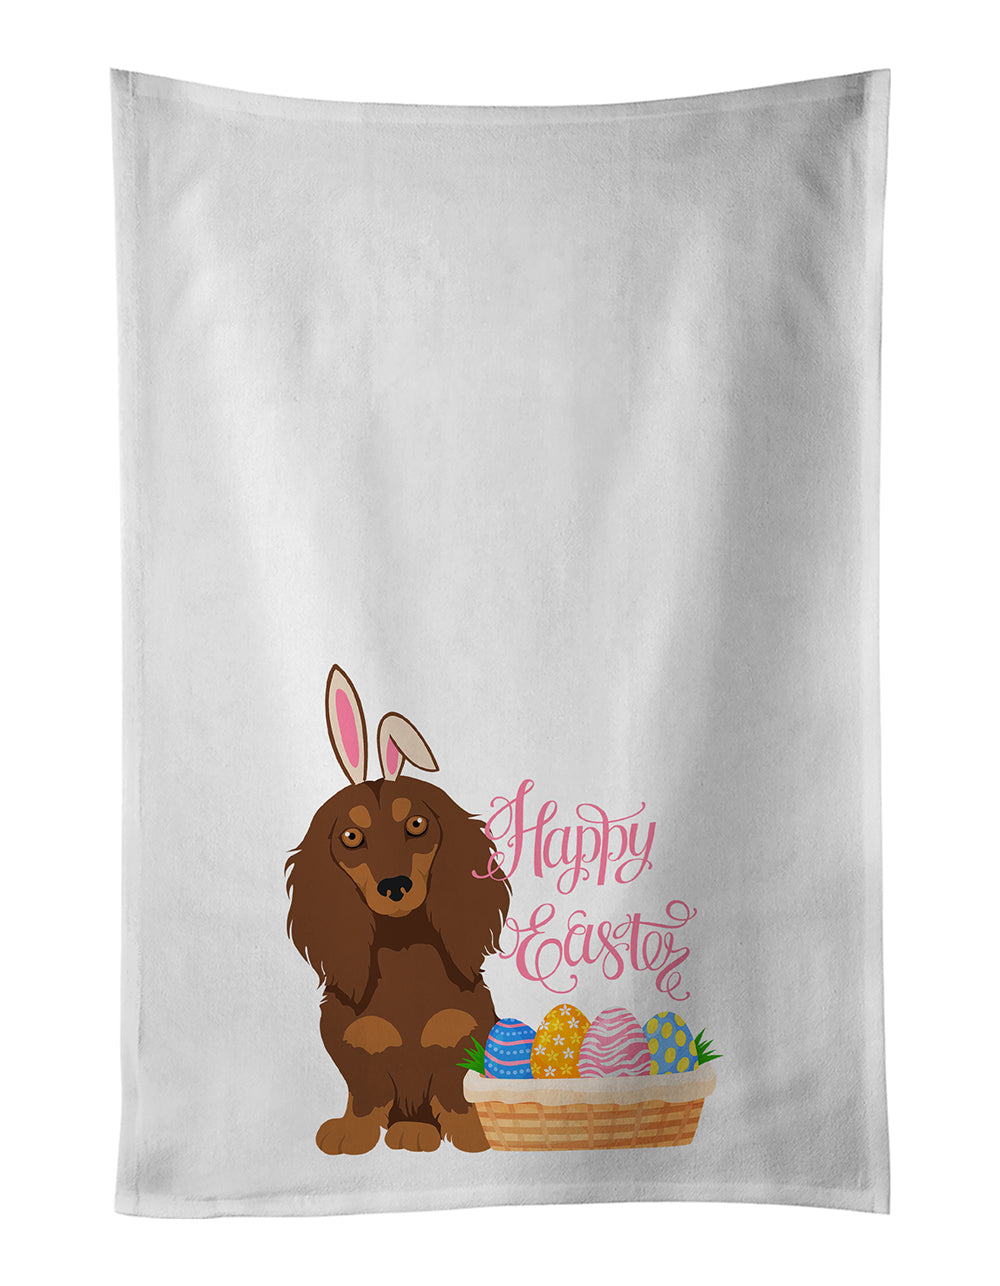 Buy this Longhair Chocolate and Tan Dachshund Easter White Kitchen Towel Set of 2 Dish Towels